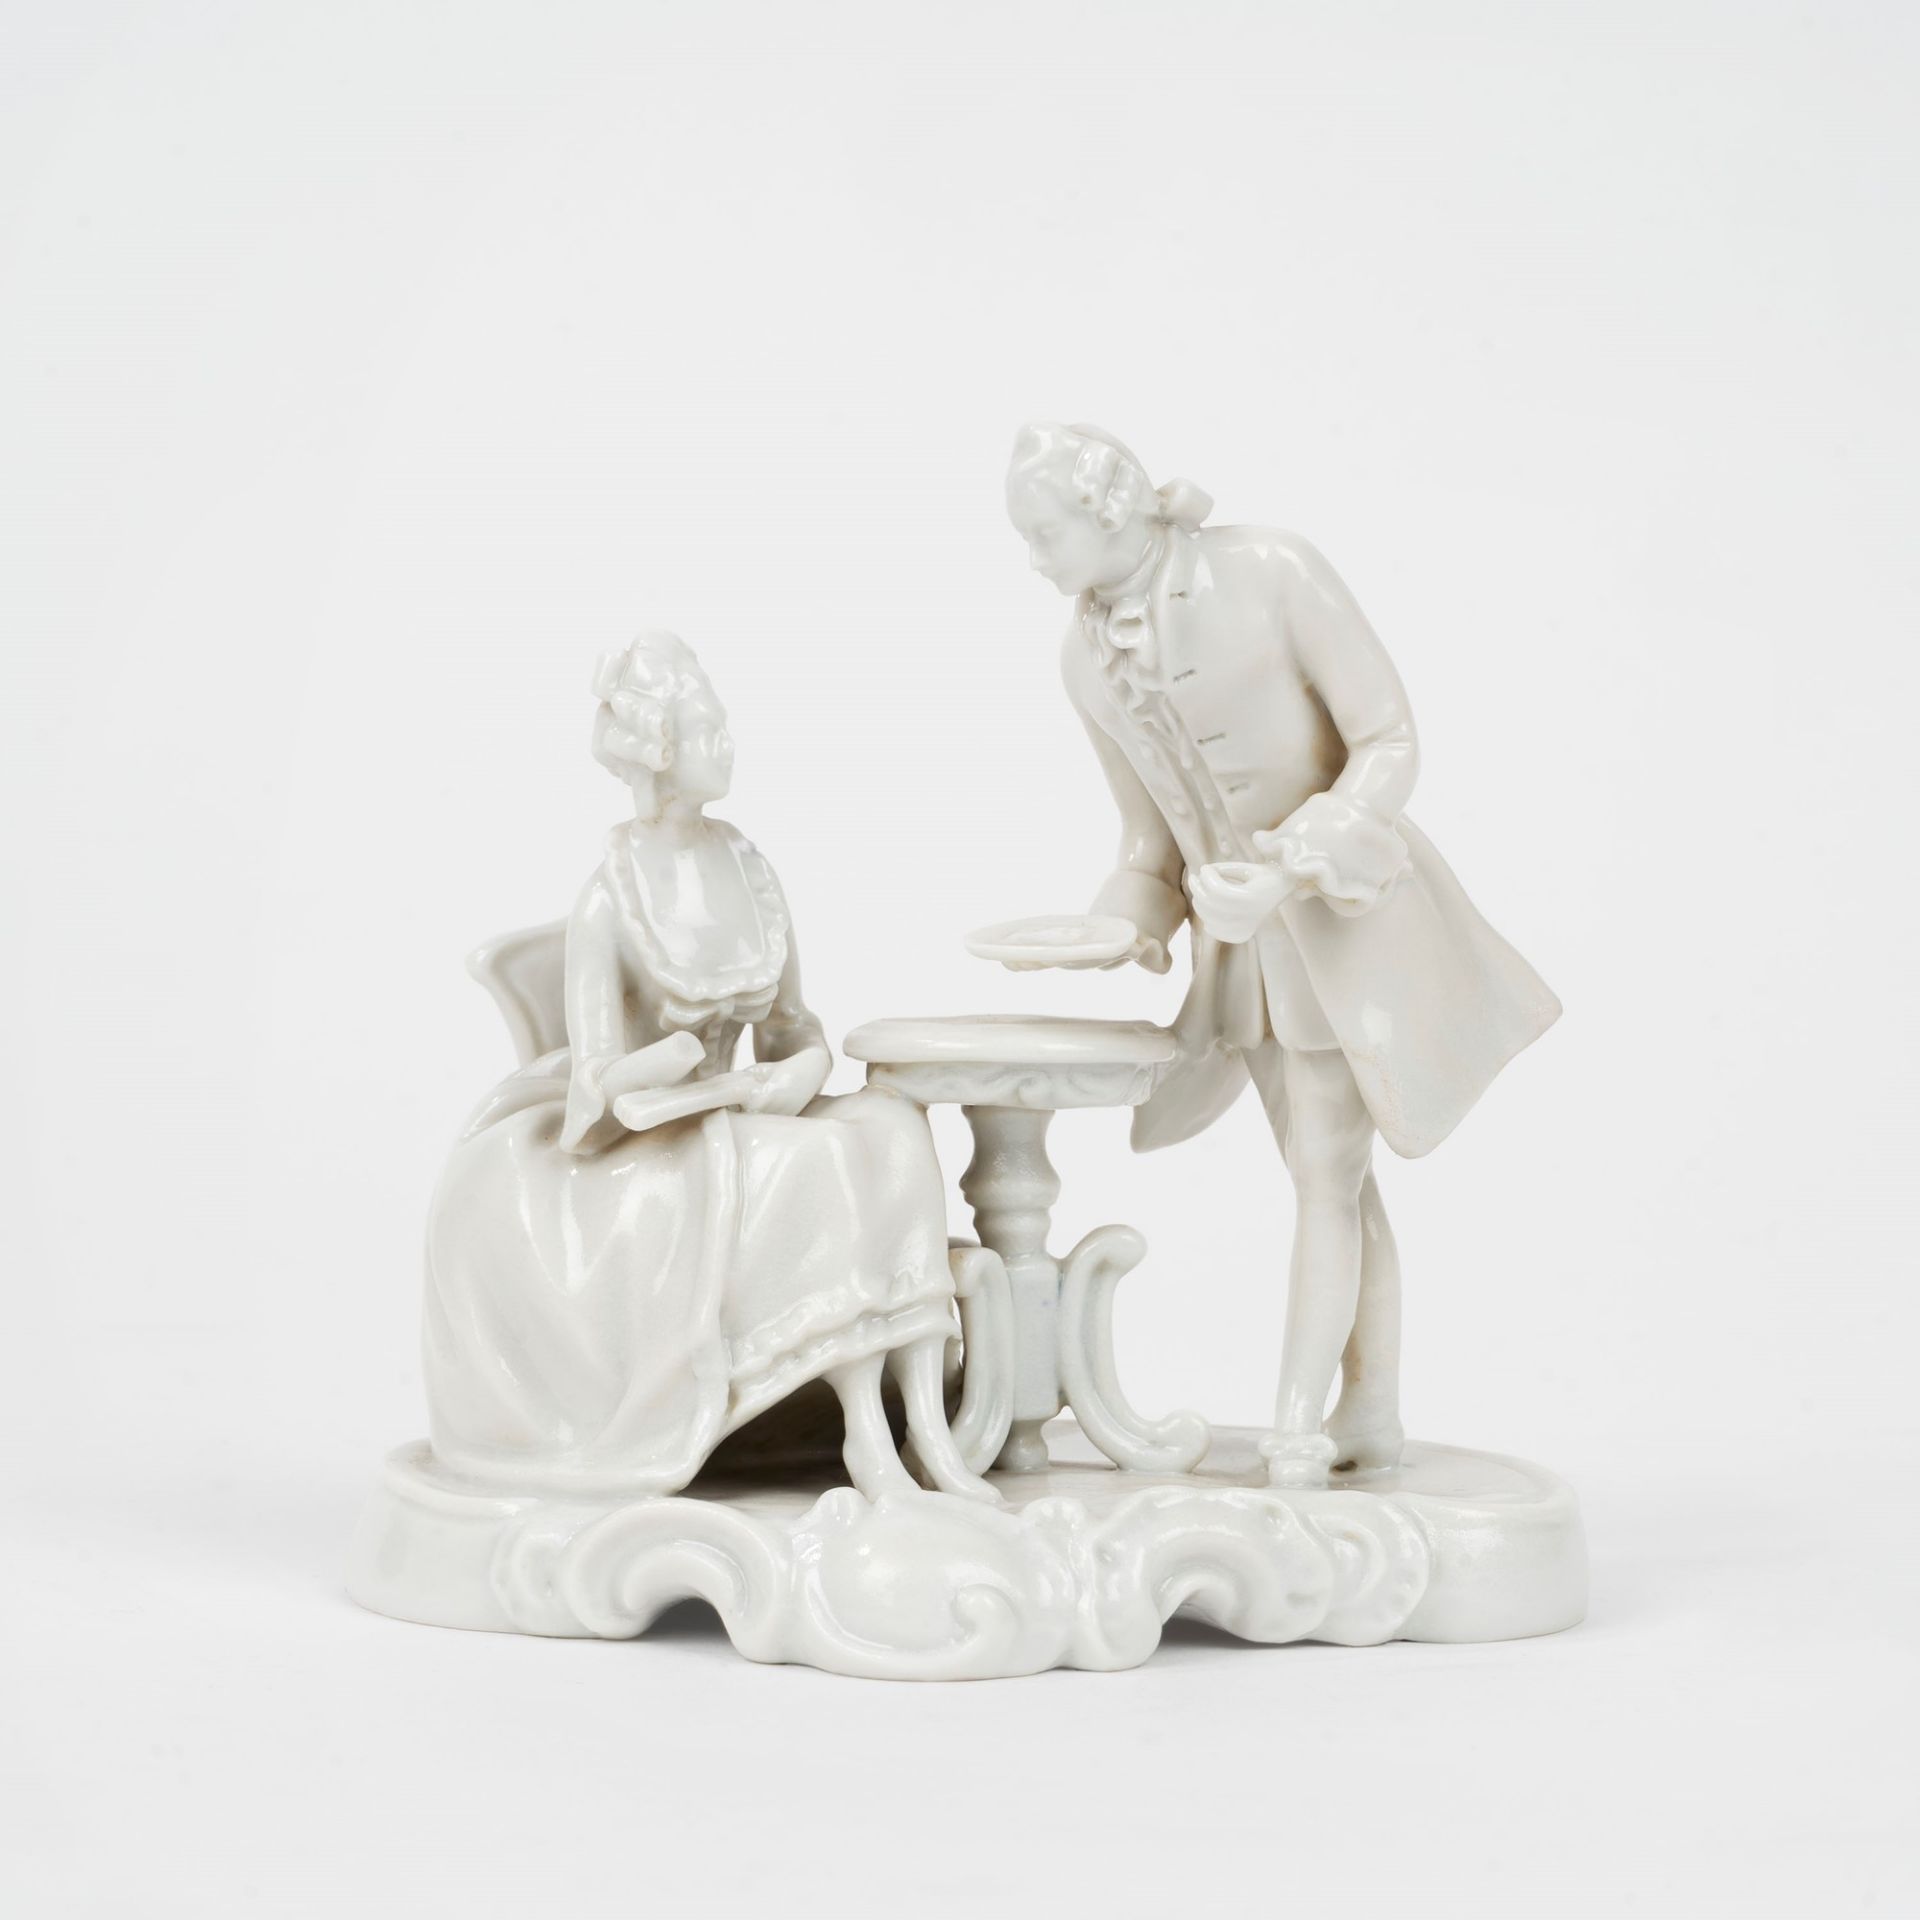 Lot consisting of seven white porcelain sculptures, 20th century - Image 3 of 10